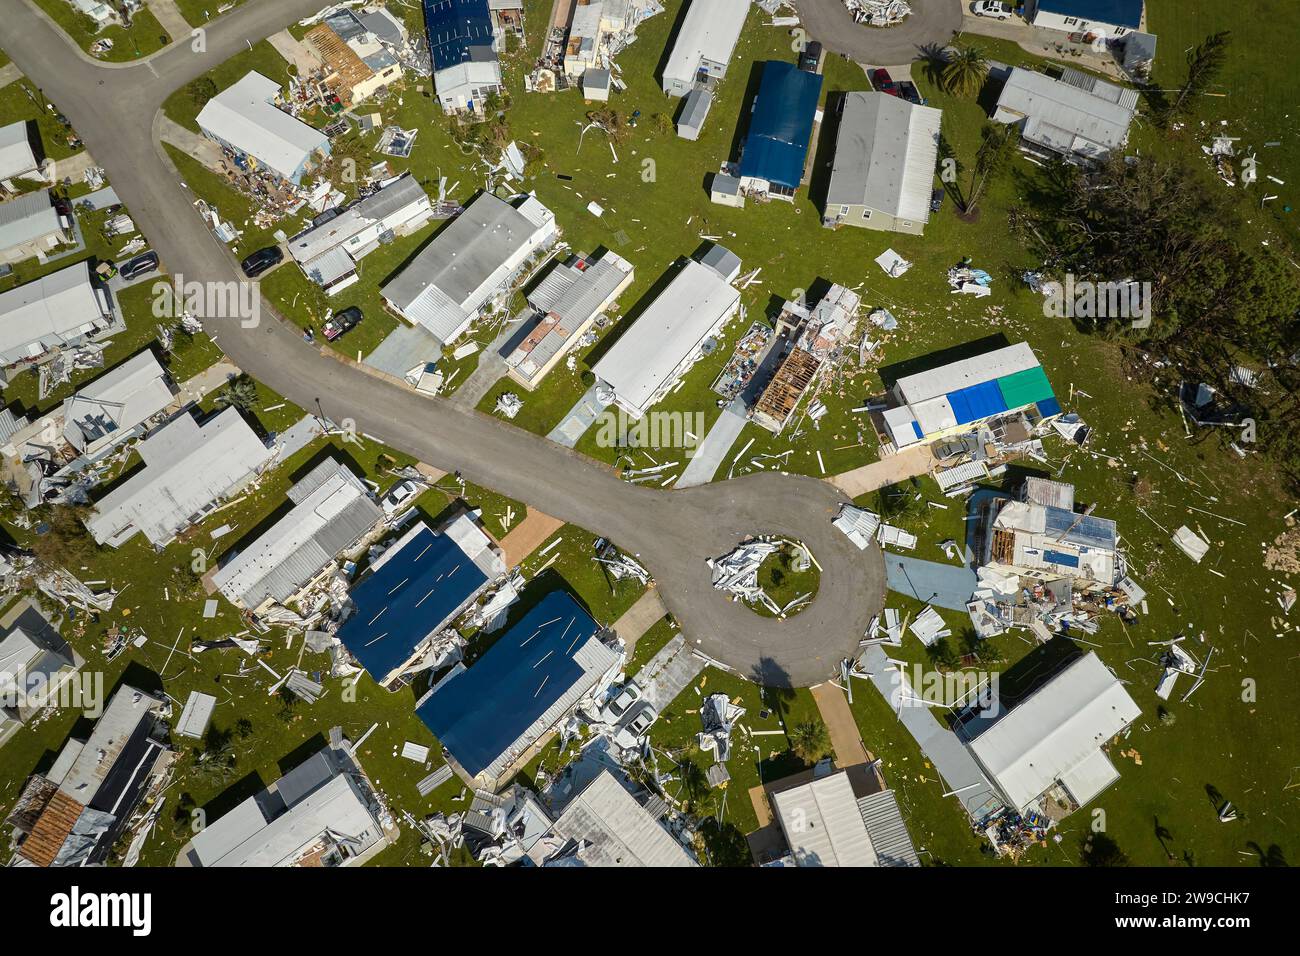 Badly damaged mobile homes after hurricane Ian in Florida residential area. Consequences of natural disaster Stock Photo